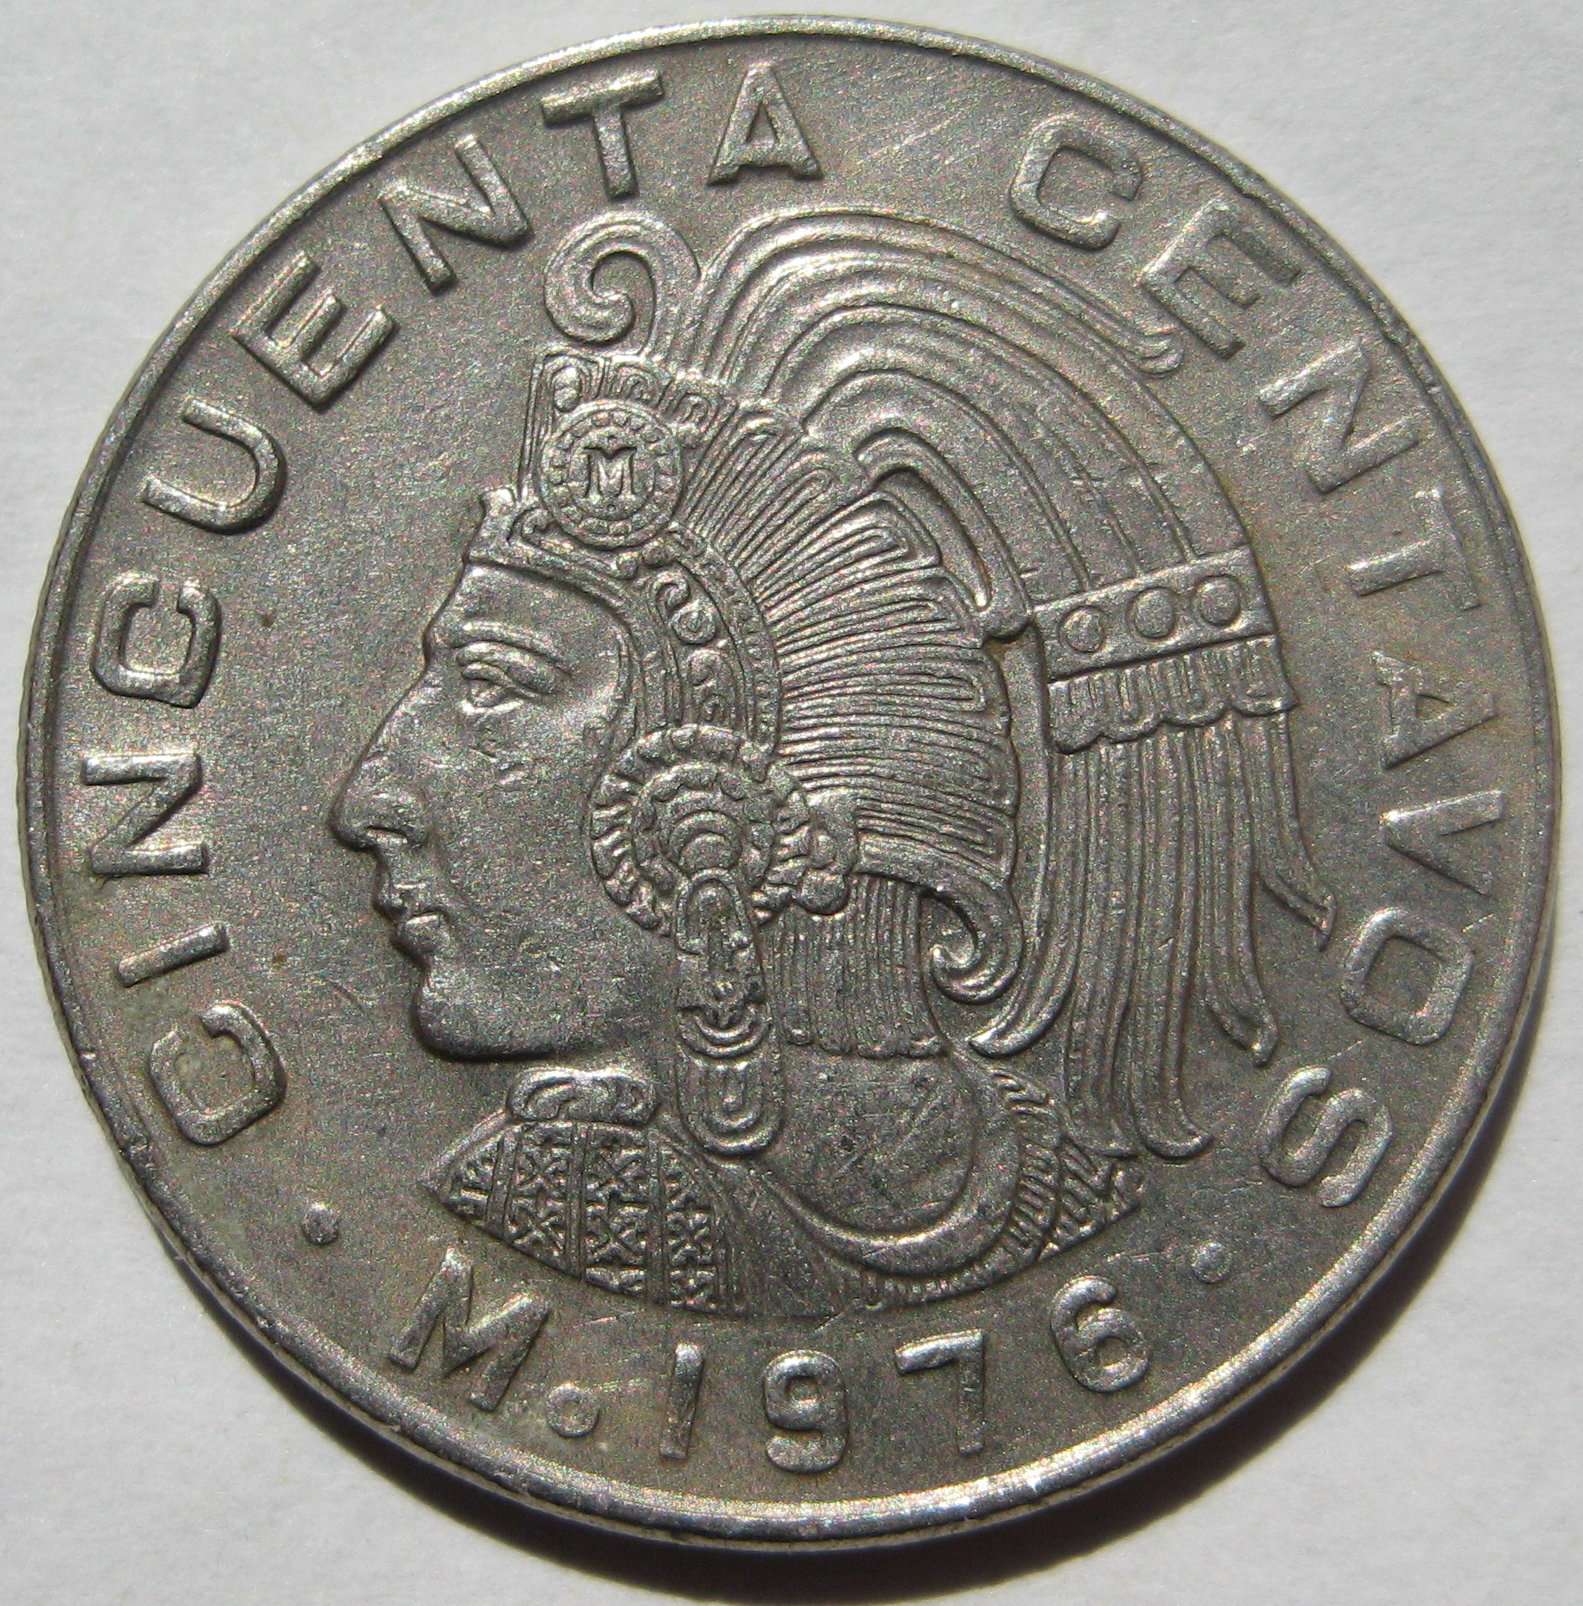 Mexico-Lot of 15 Coins Cincuenta, $50, & $5 - 1964-1983